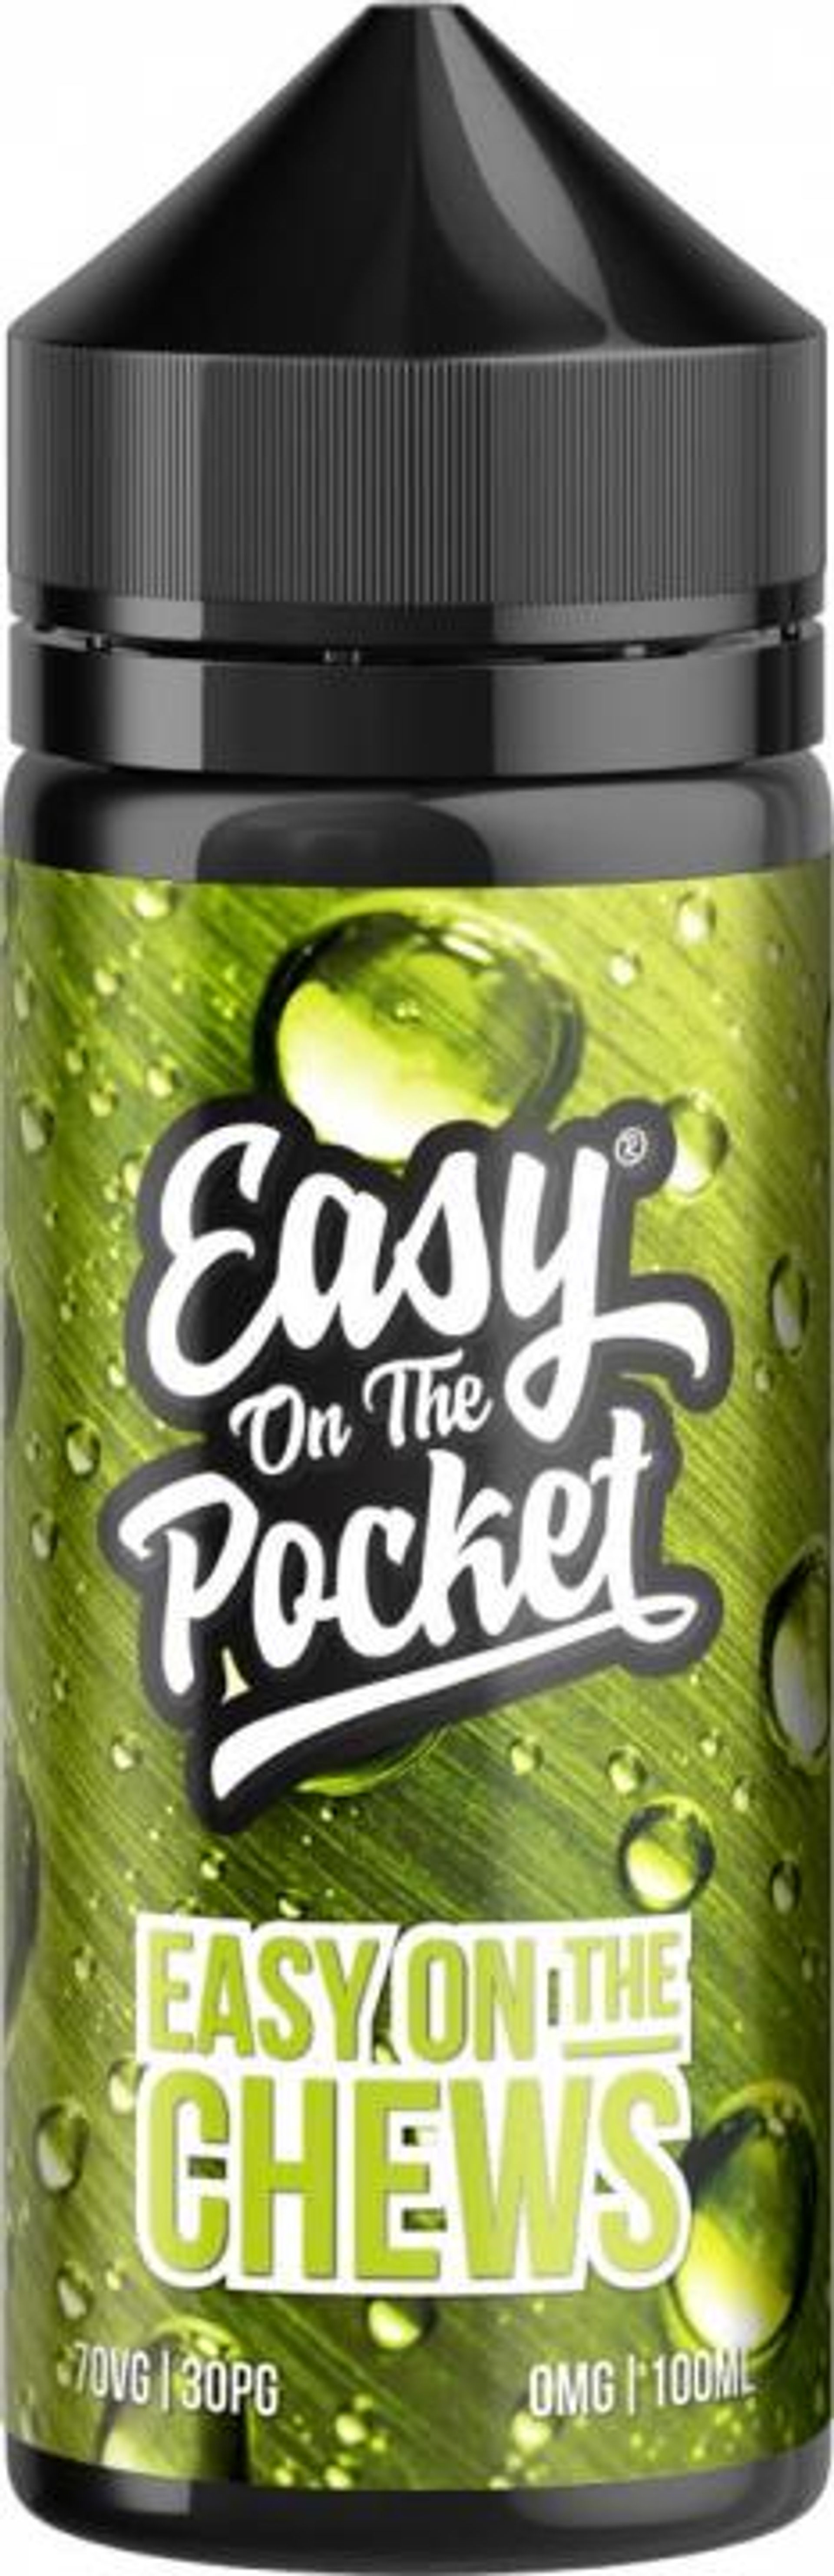 Image of Easy On The Chews by Easy On The Pocket